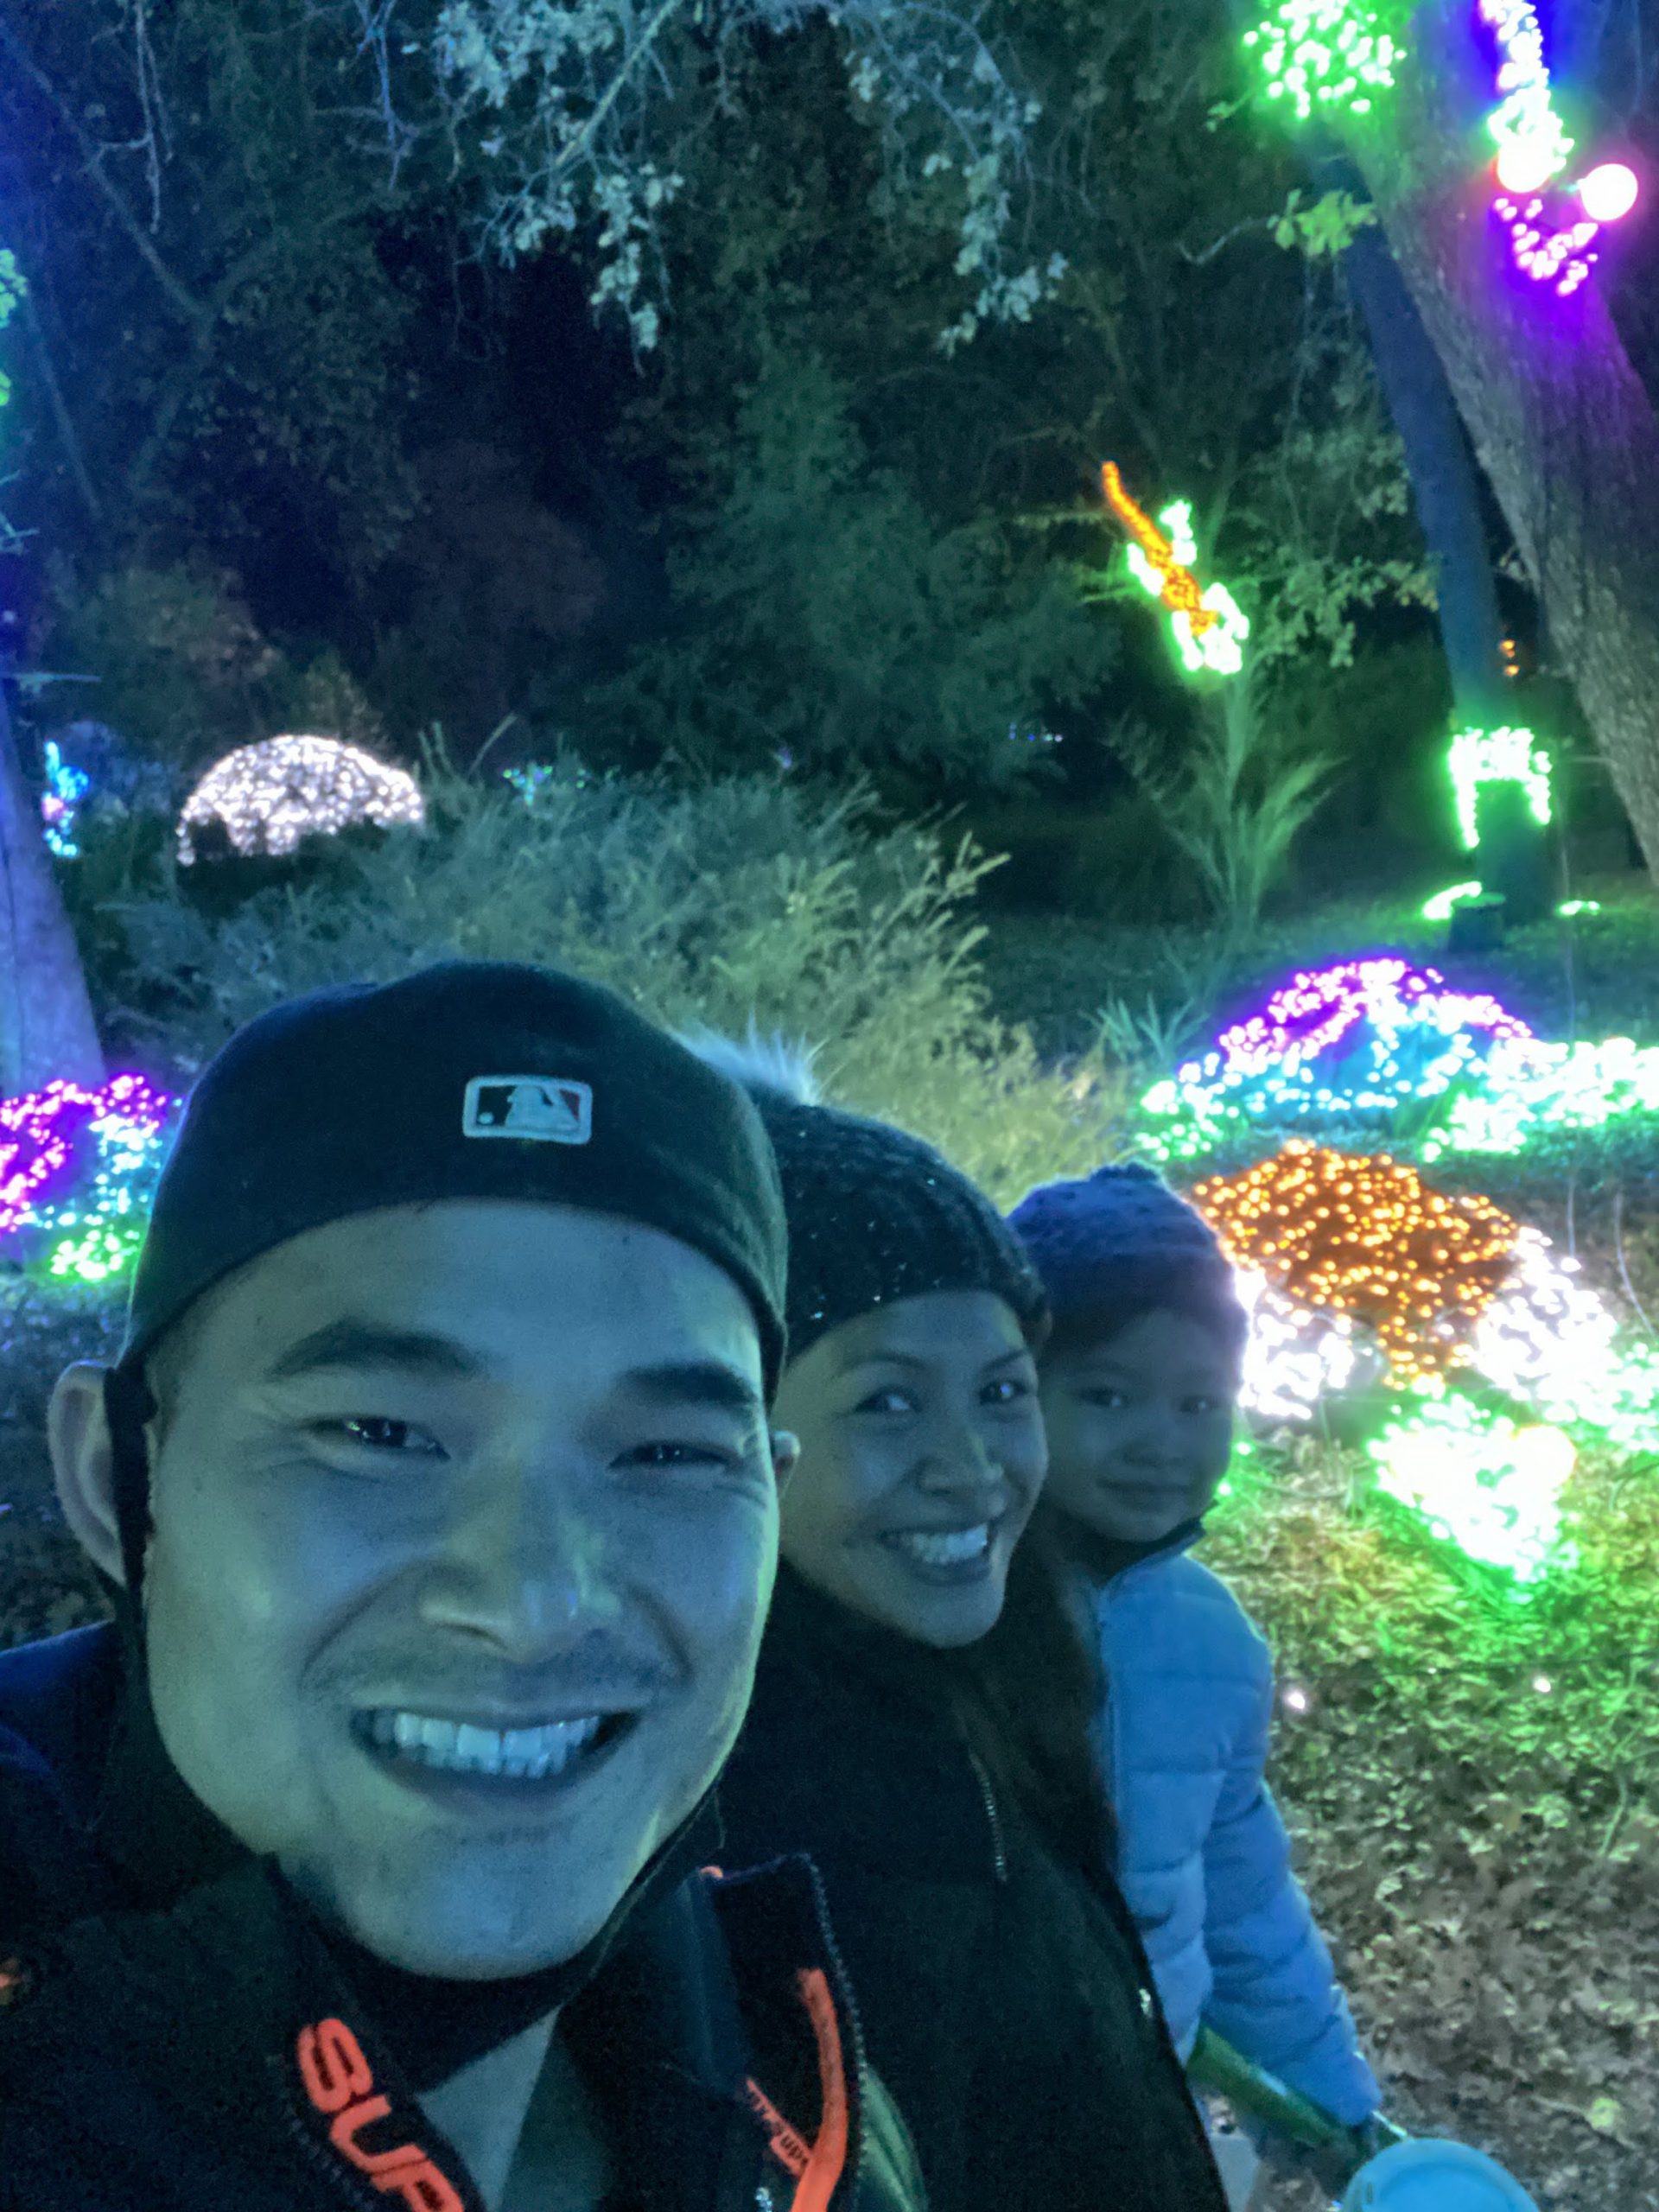 Redding Garden of Lights at Turtle Bay, a 'Must' Holiday Adventure